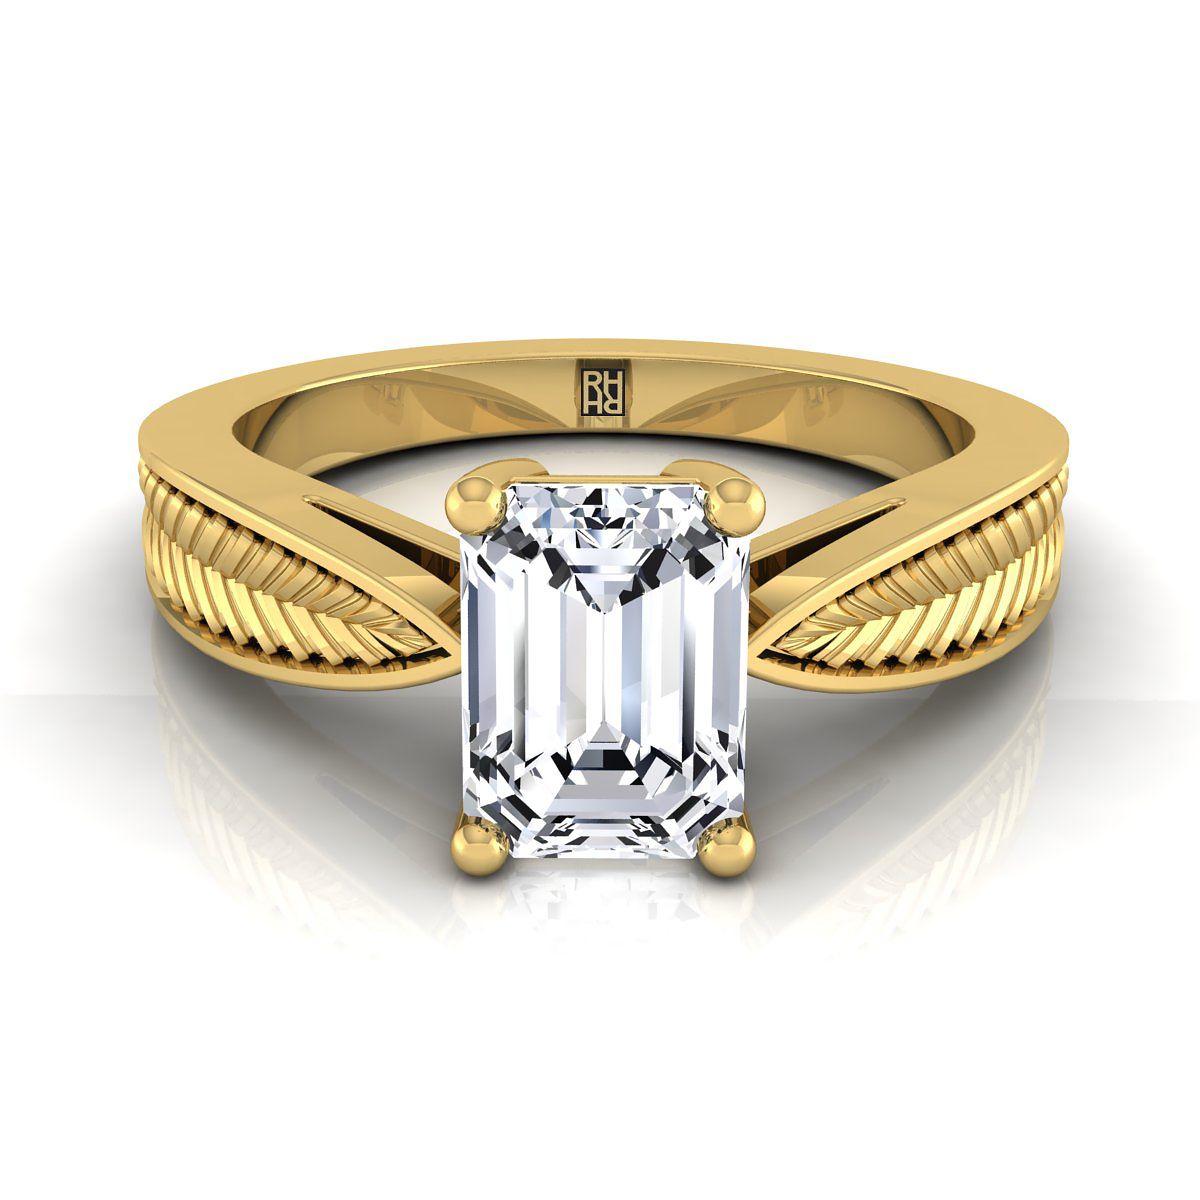 14K Yellow Gold Emerald Cut Vintage Inspired Leaf Pattern Pinched Solitaire Engagement Ring